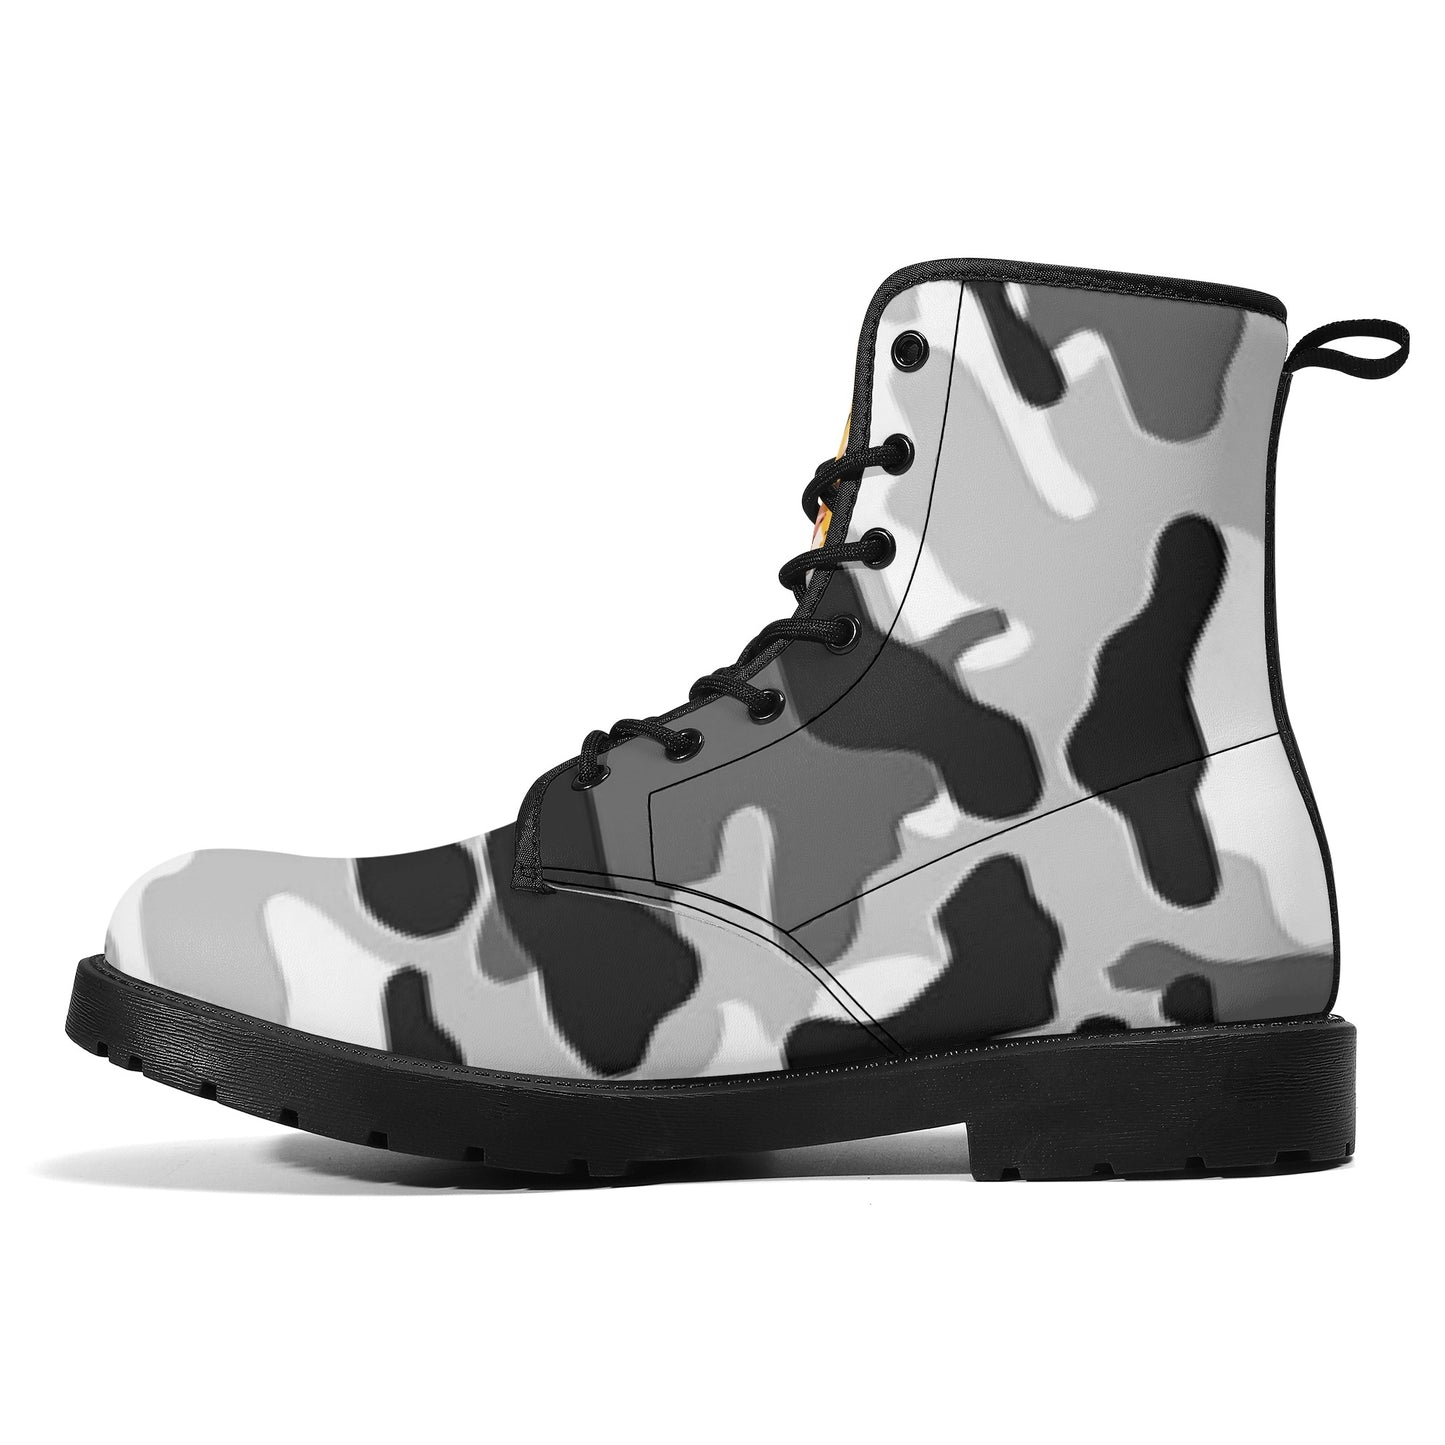 Stand out  with the  Nugget Army Dental Mens Leather Boots  available at Hey Nugget. Grab yours today!